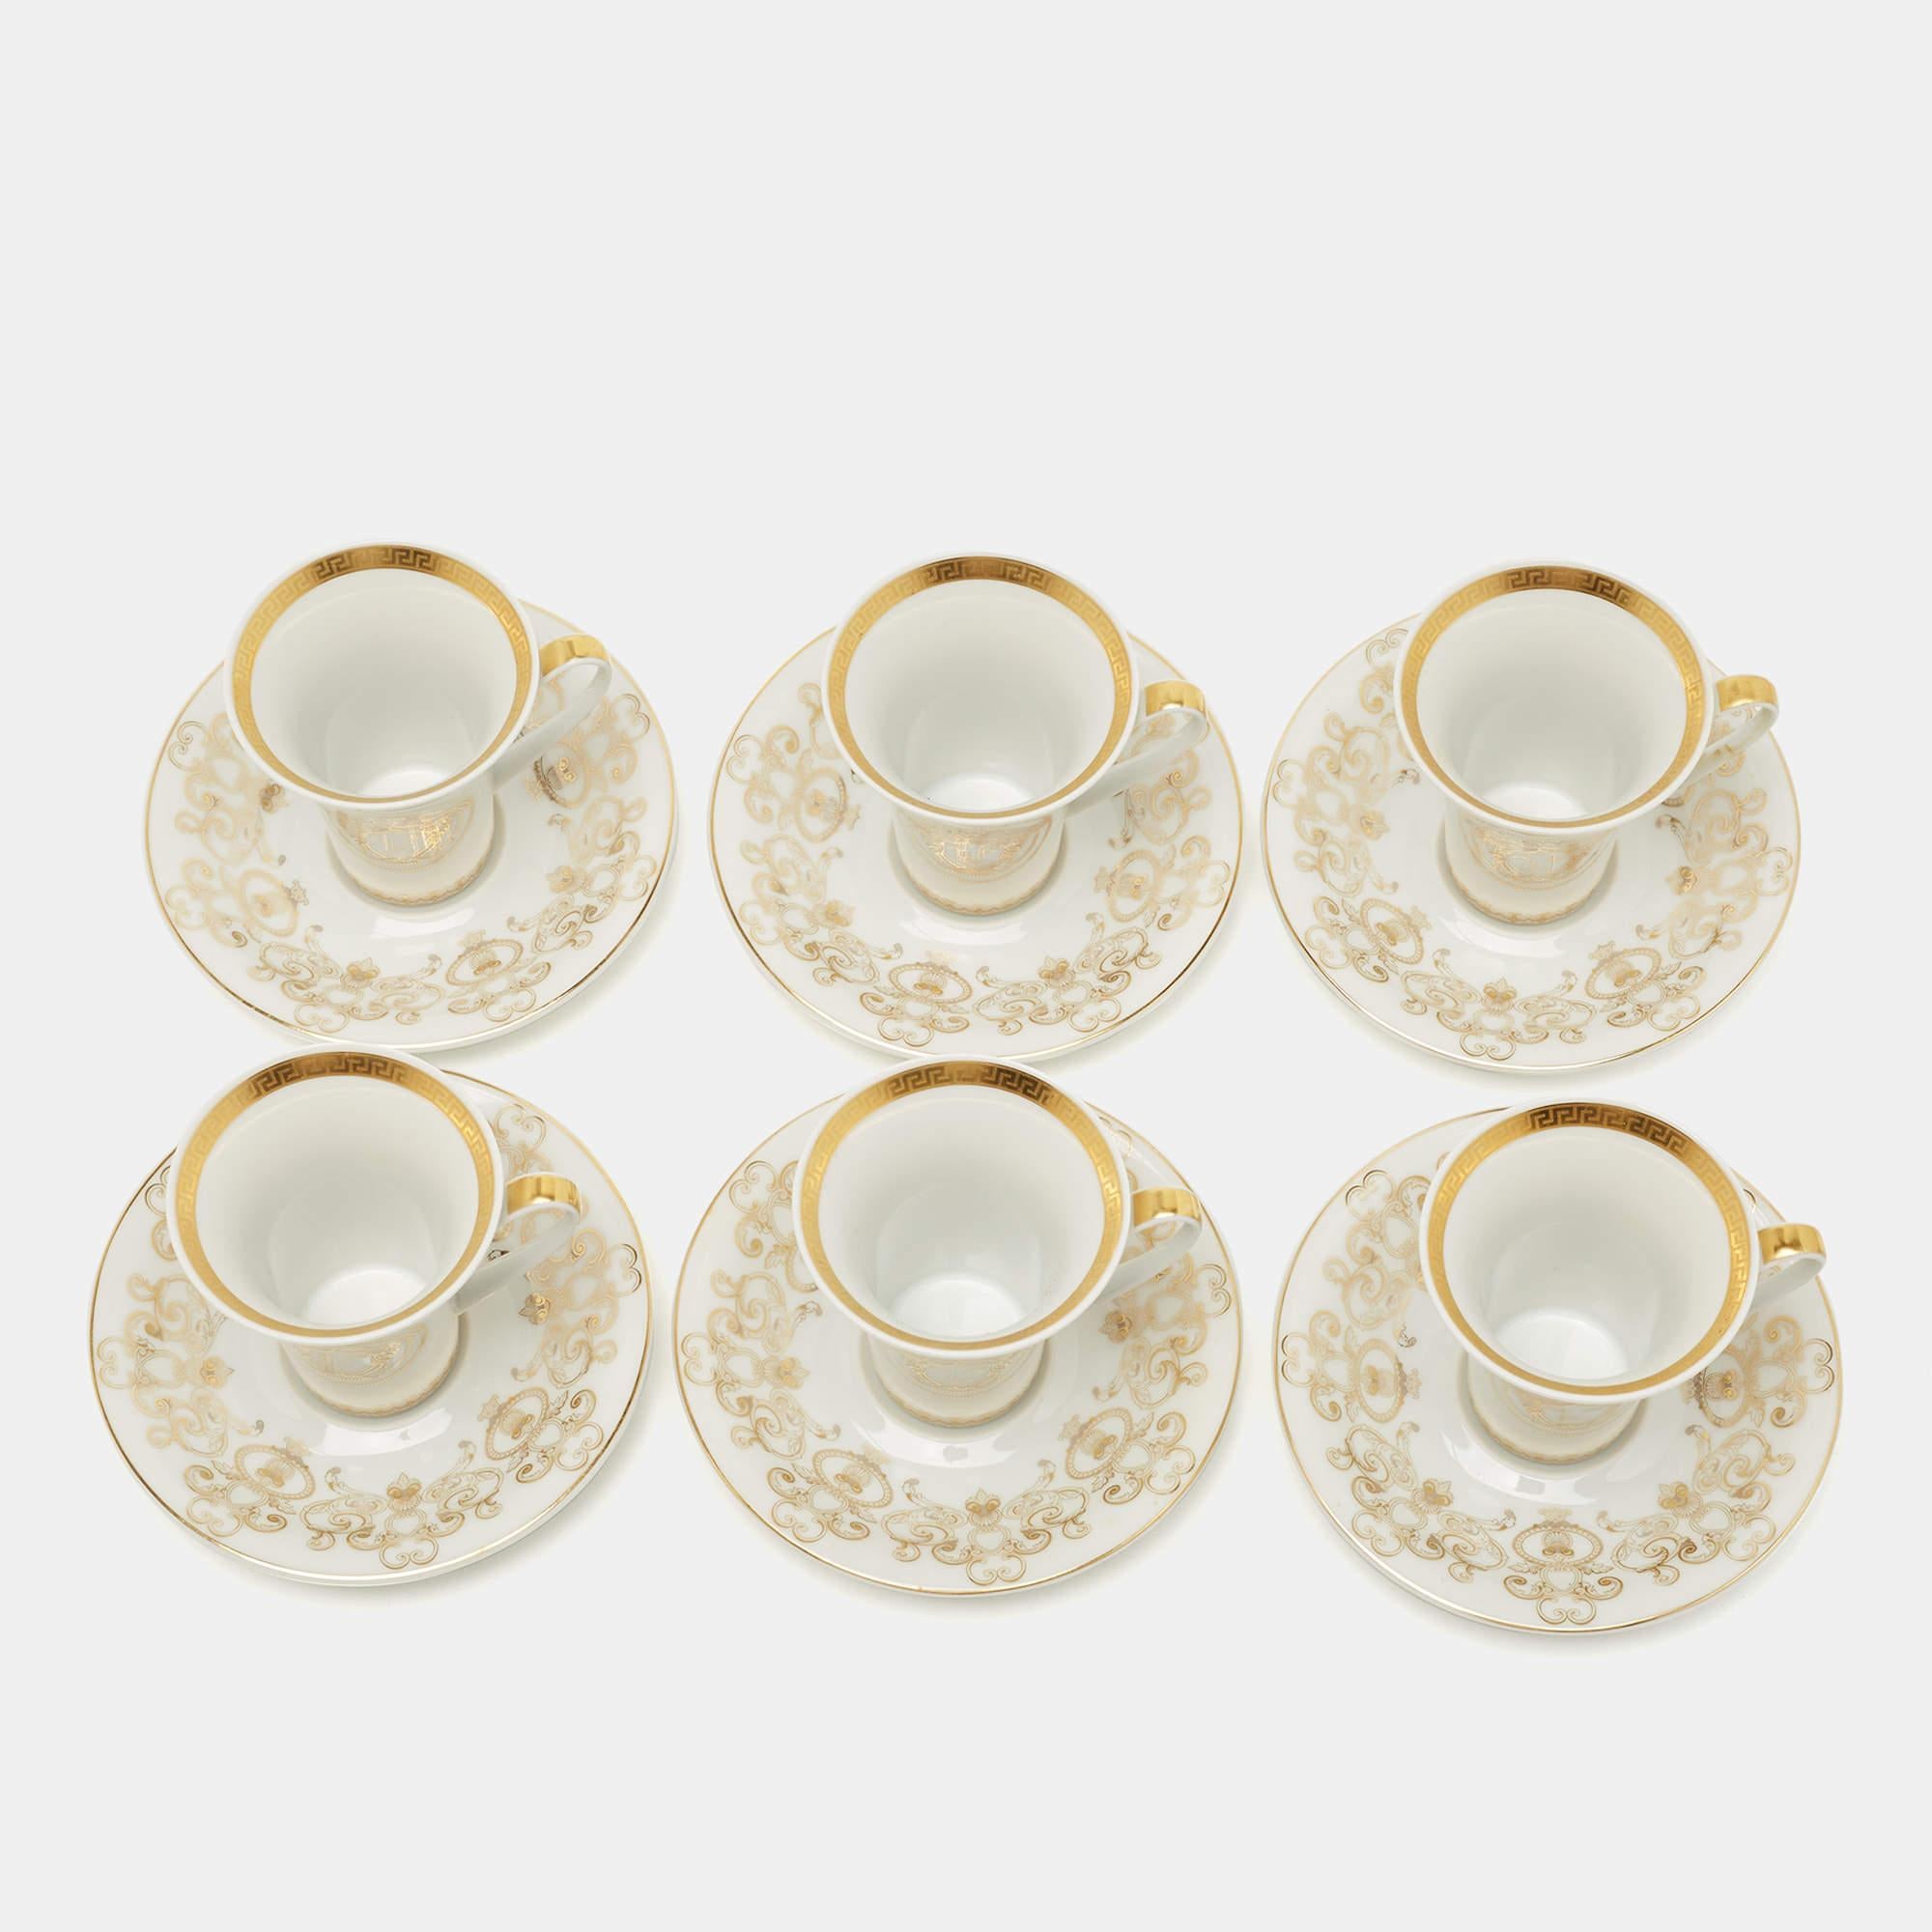 Elevate your table setting with this set of six cups and saucers from Versace x Rosenthal. Crafted excellently using high-quality porcelain, the set has House code details that have been carefully applied to project the most luxurious appeal.

